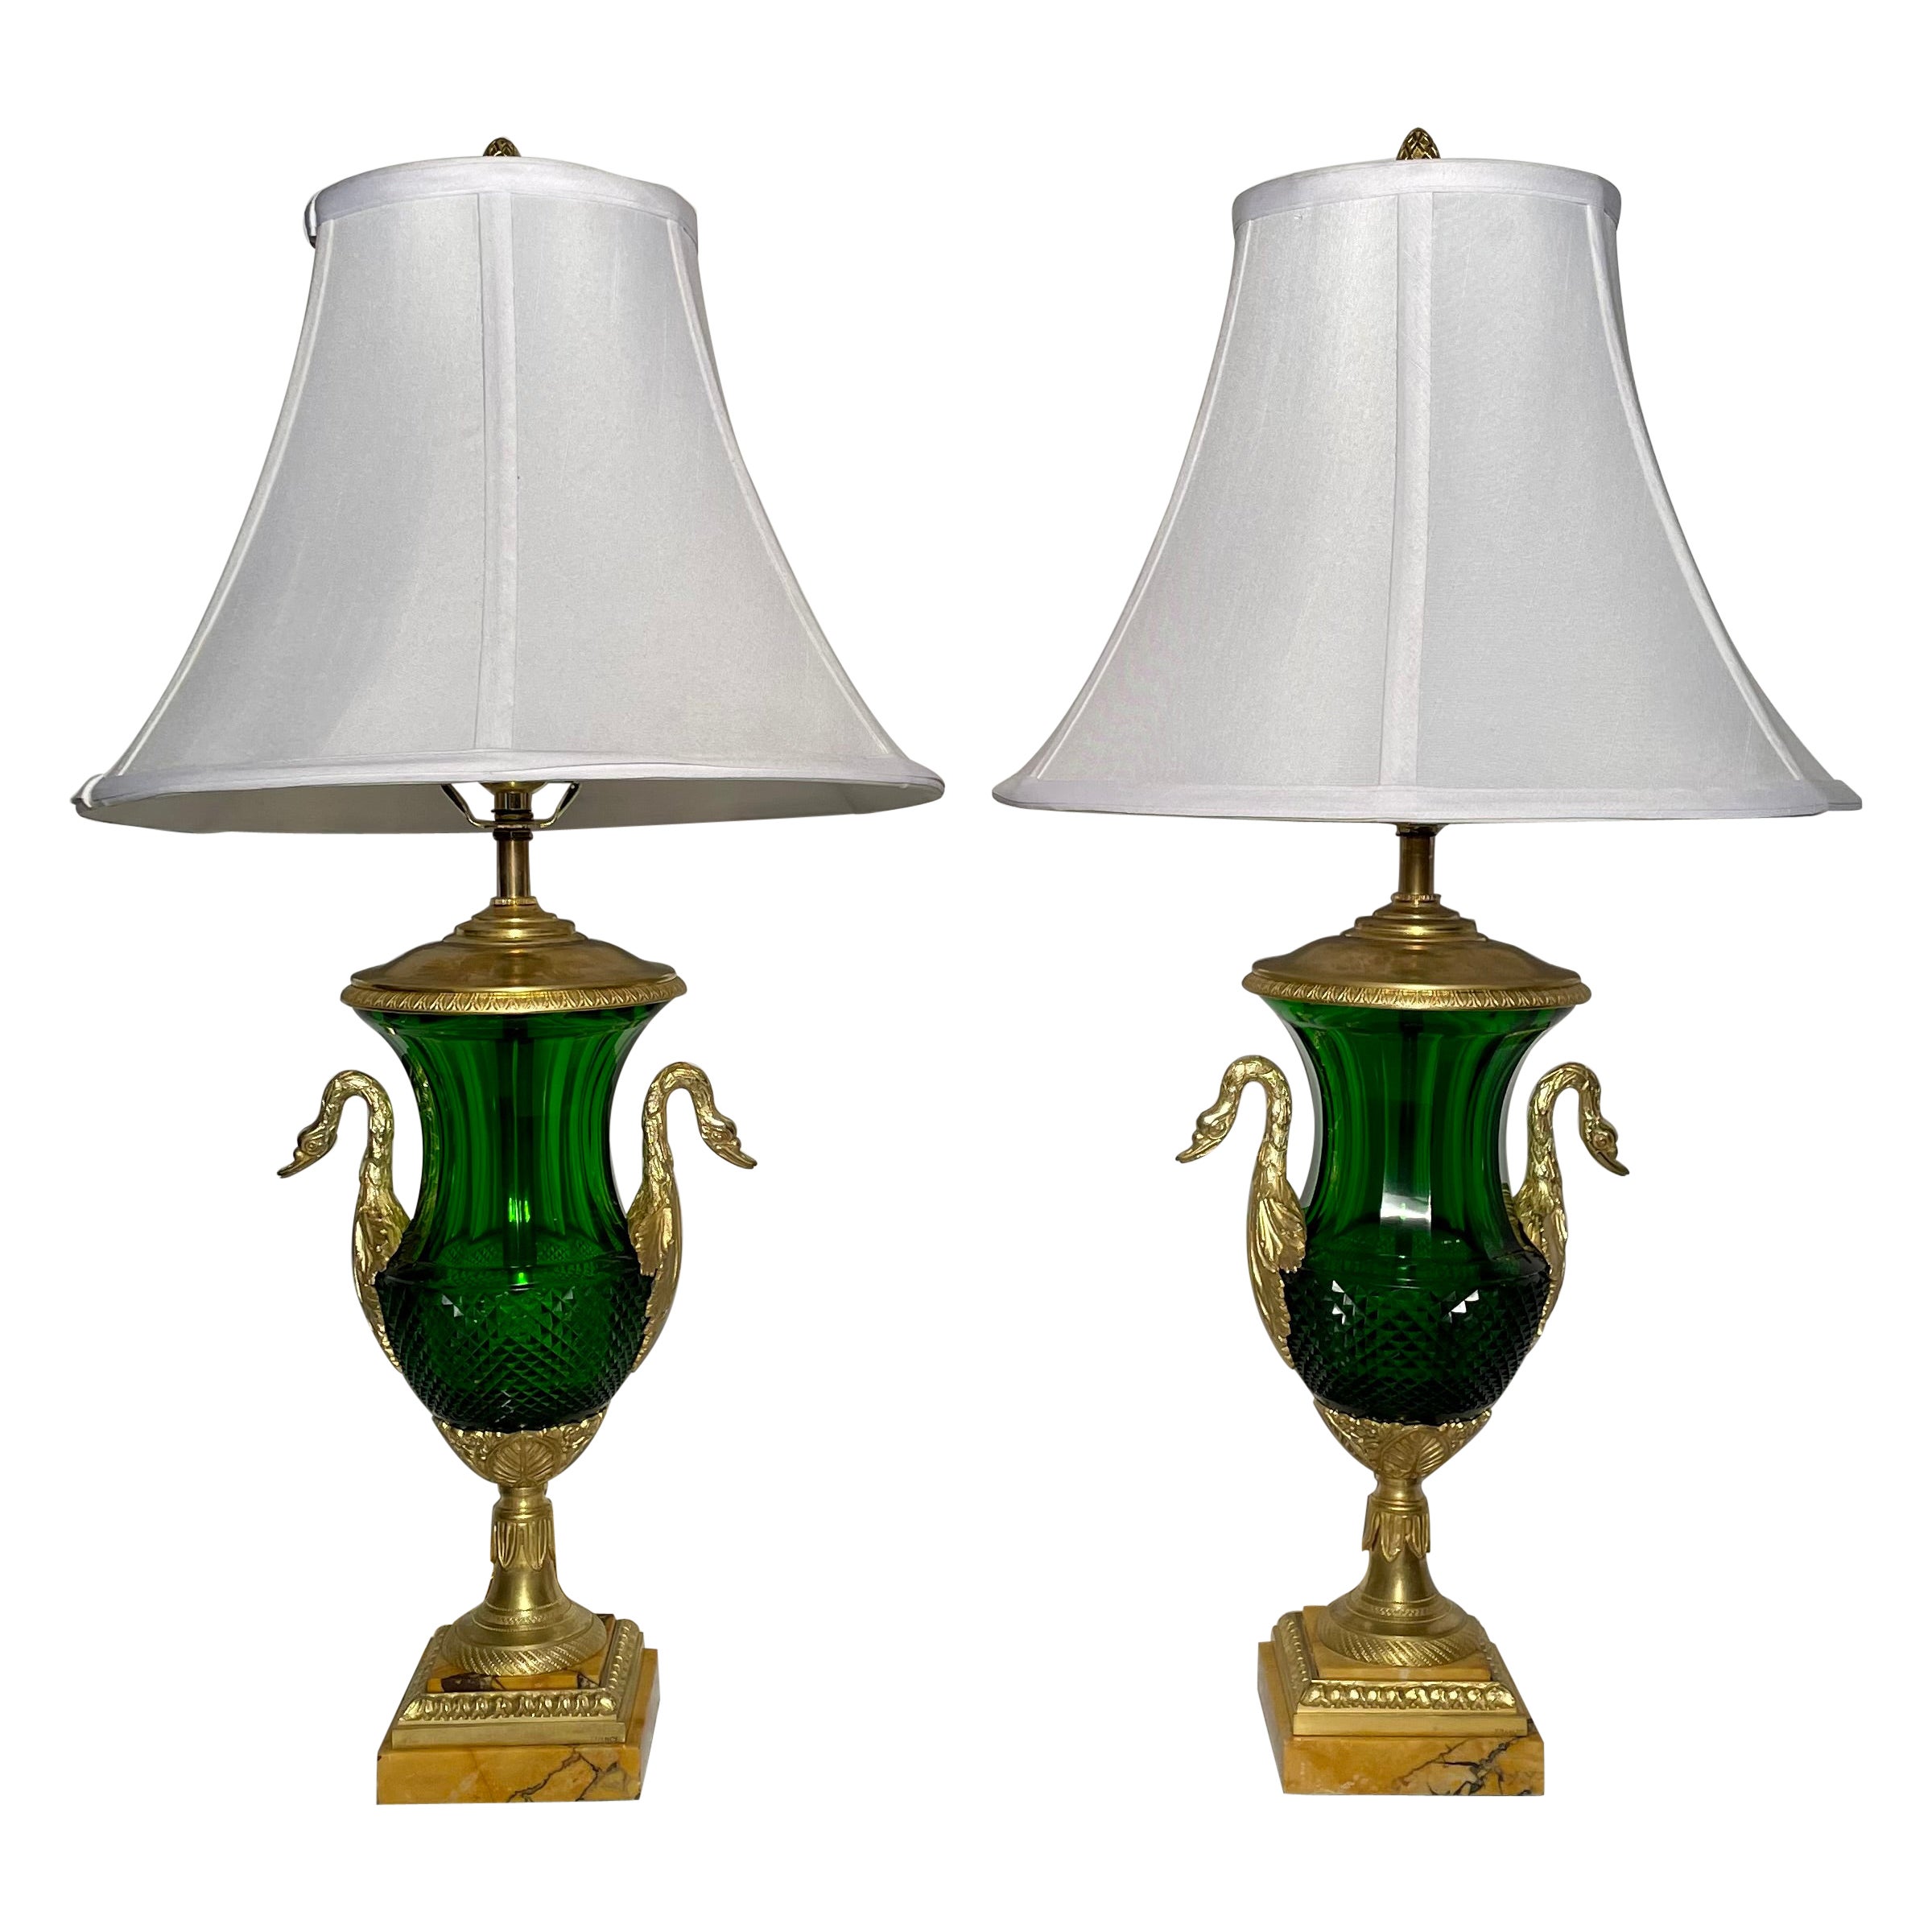 Pair Antique French Emerald Colored Baccarat Crystal & Gold Bronze Lamps, c 1890 For Sale